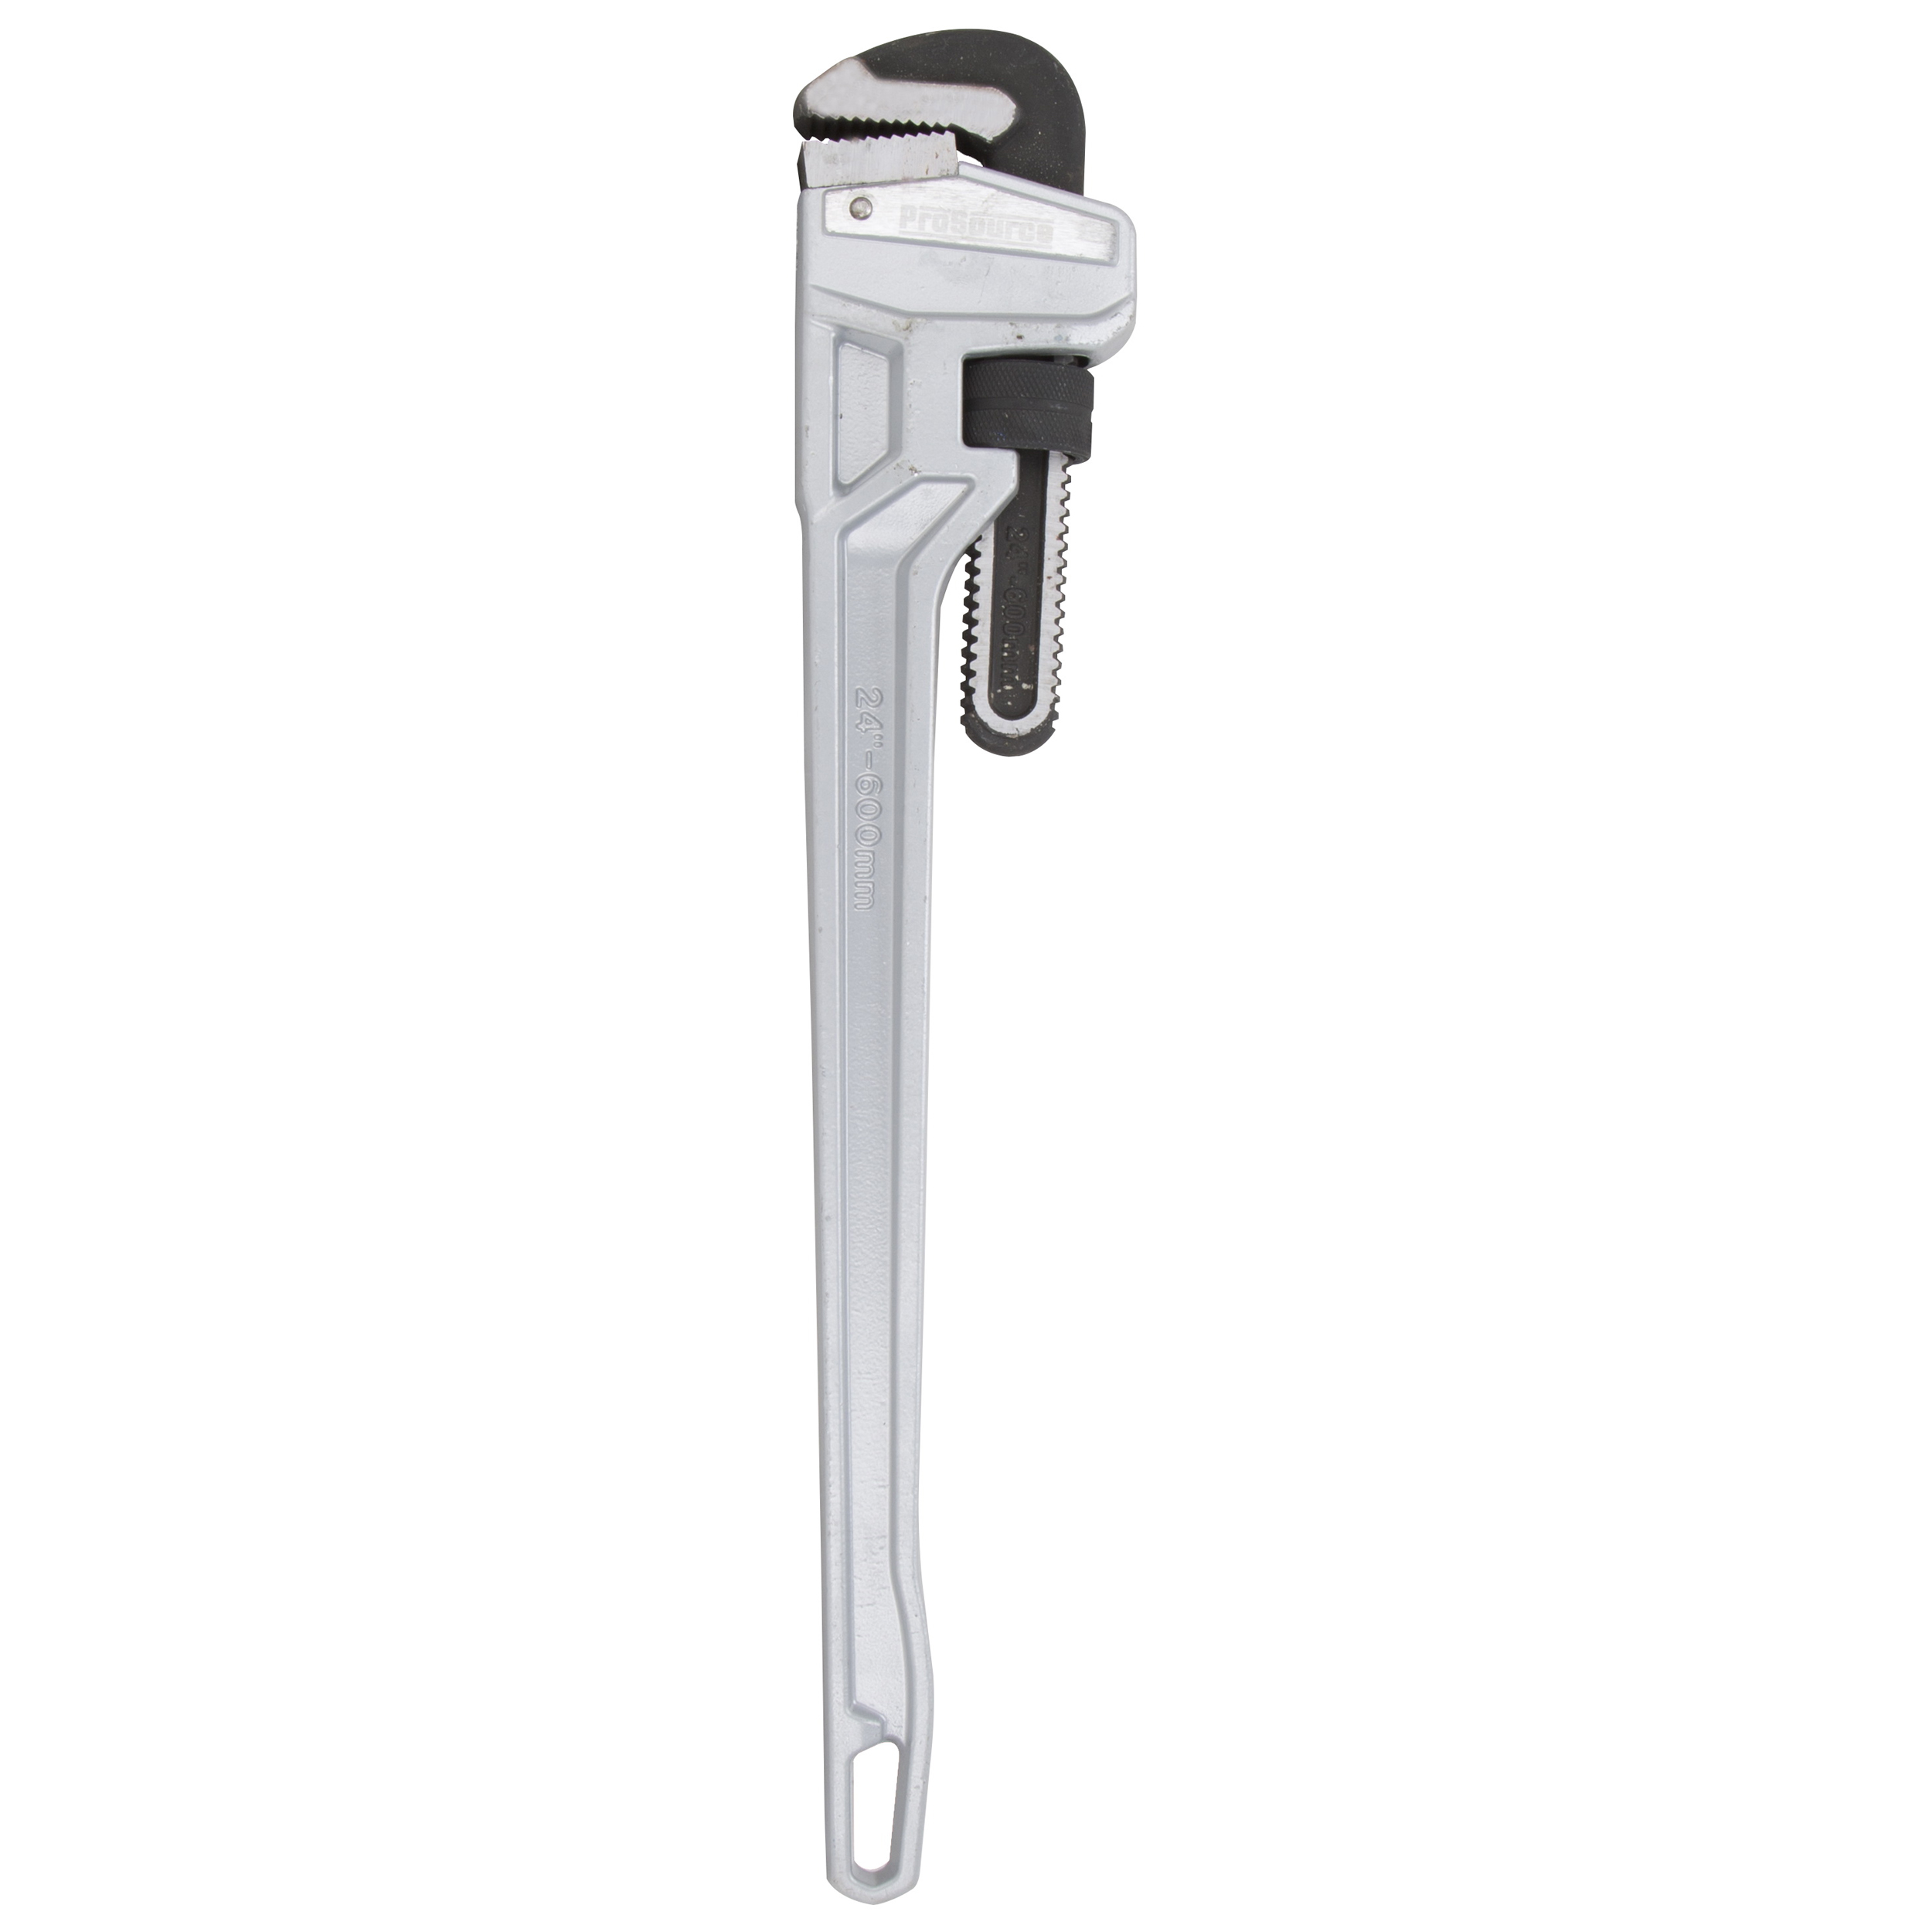 JL40142 Pipe Wrench, 63 mm Jaw, 24 in L, Serrated Jaw, Aluminum, Powder Coated, Heavy-Duty Handle